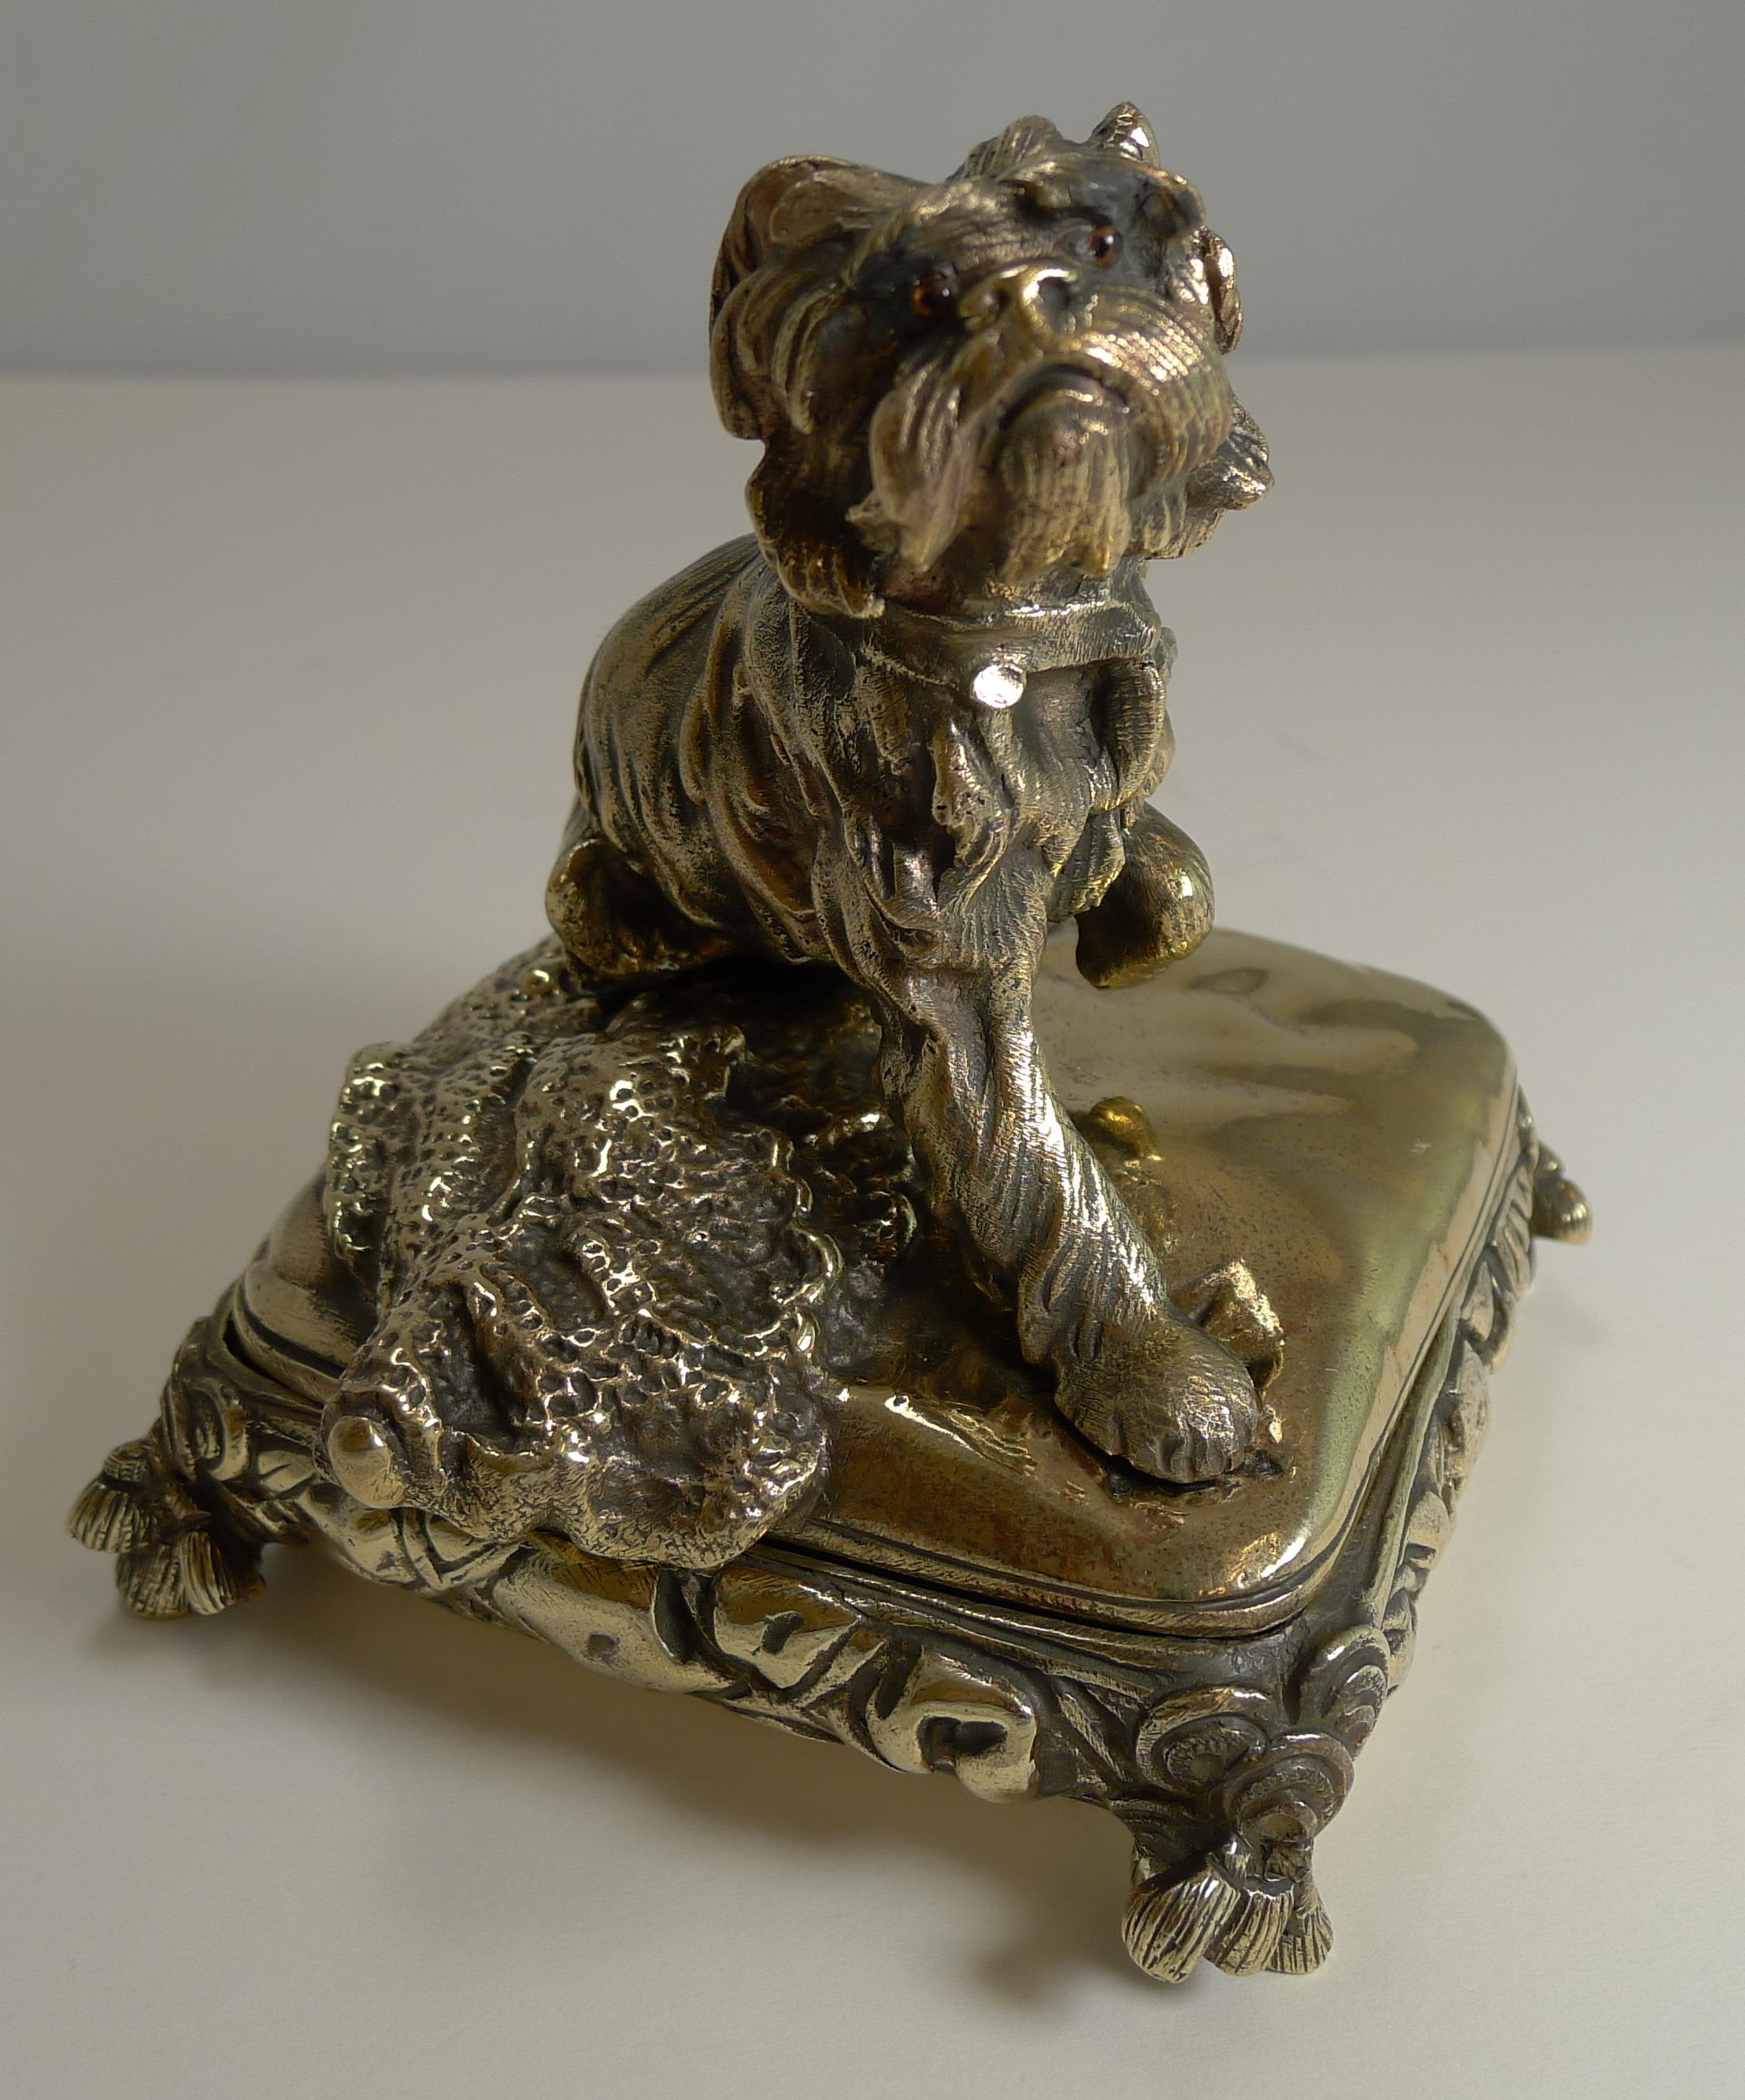 An absolutely charming Victorian novelty jewellery box made from very heavy cast brass and I think that the dog himself is Bronze, with traces of the original gilding.

The sweet little pooch sits on a tasselled cushion with a blanket by his side.